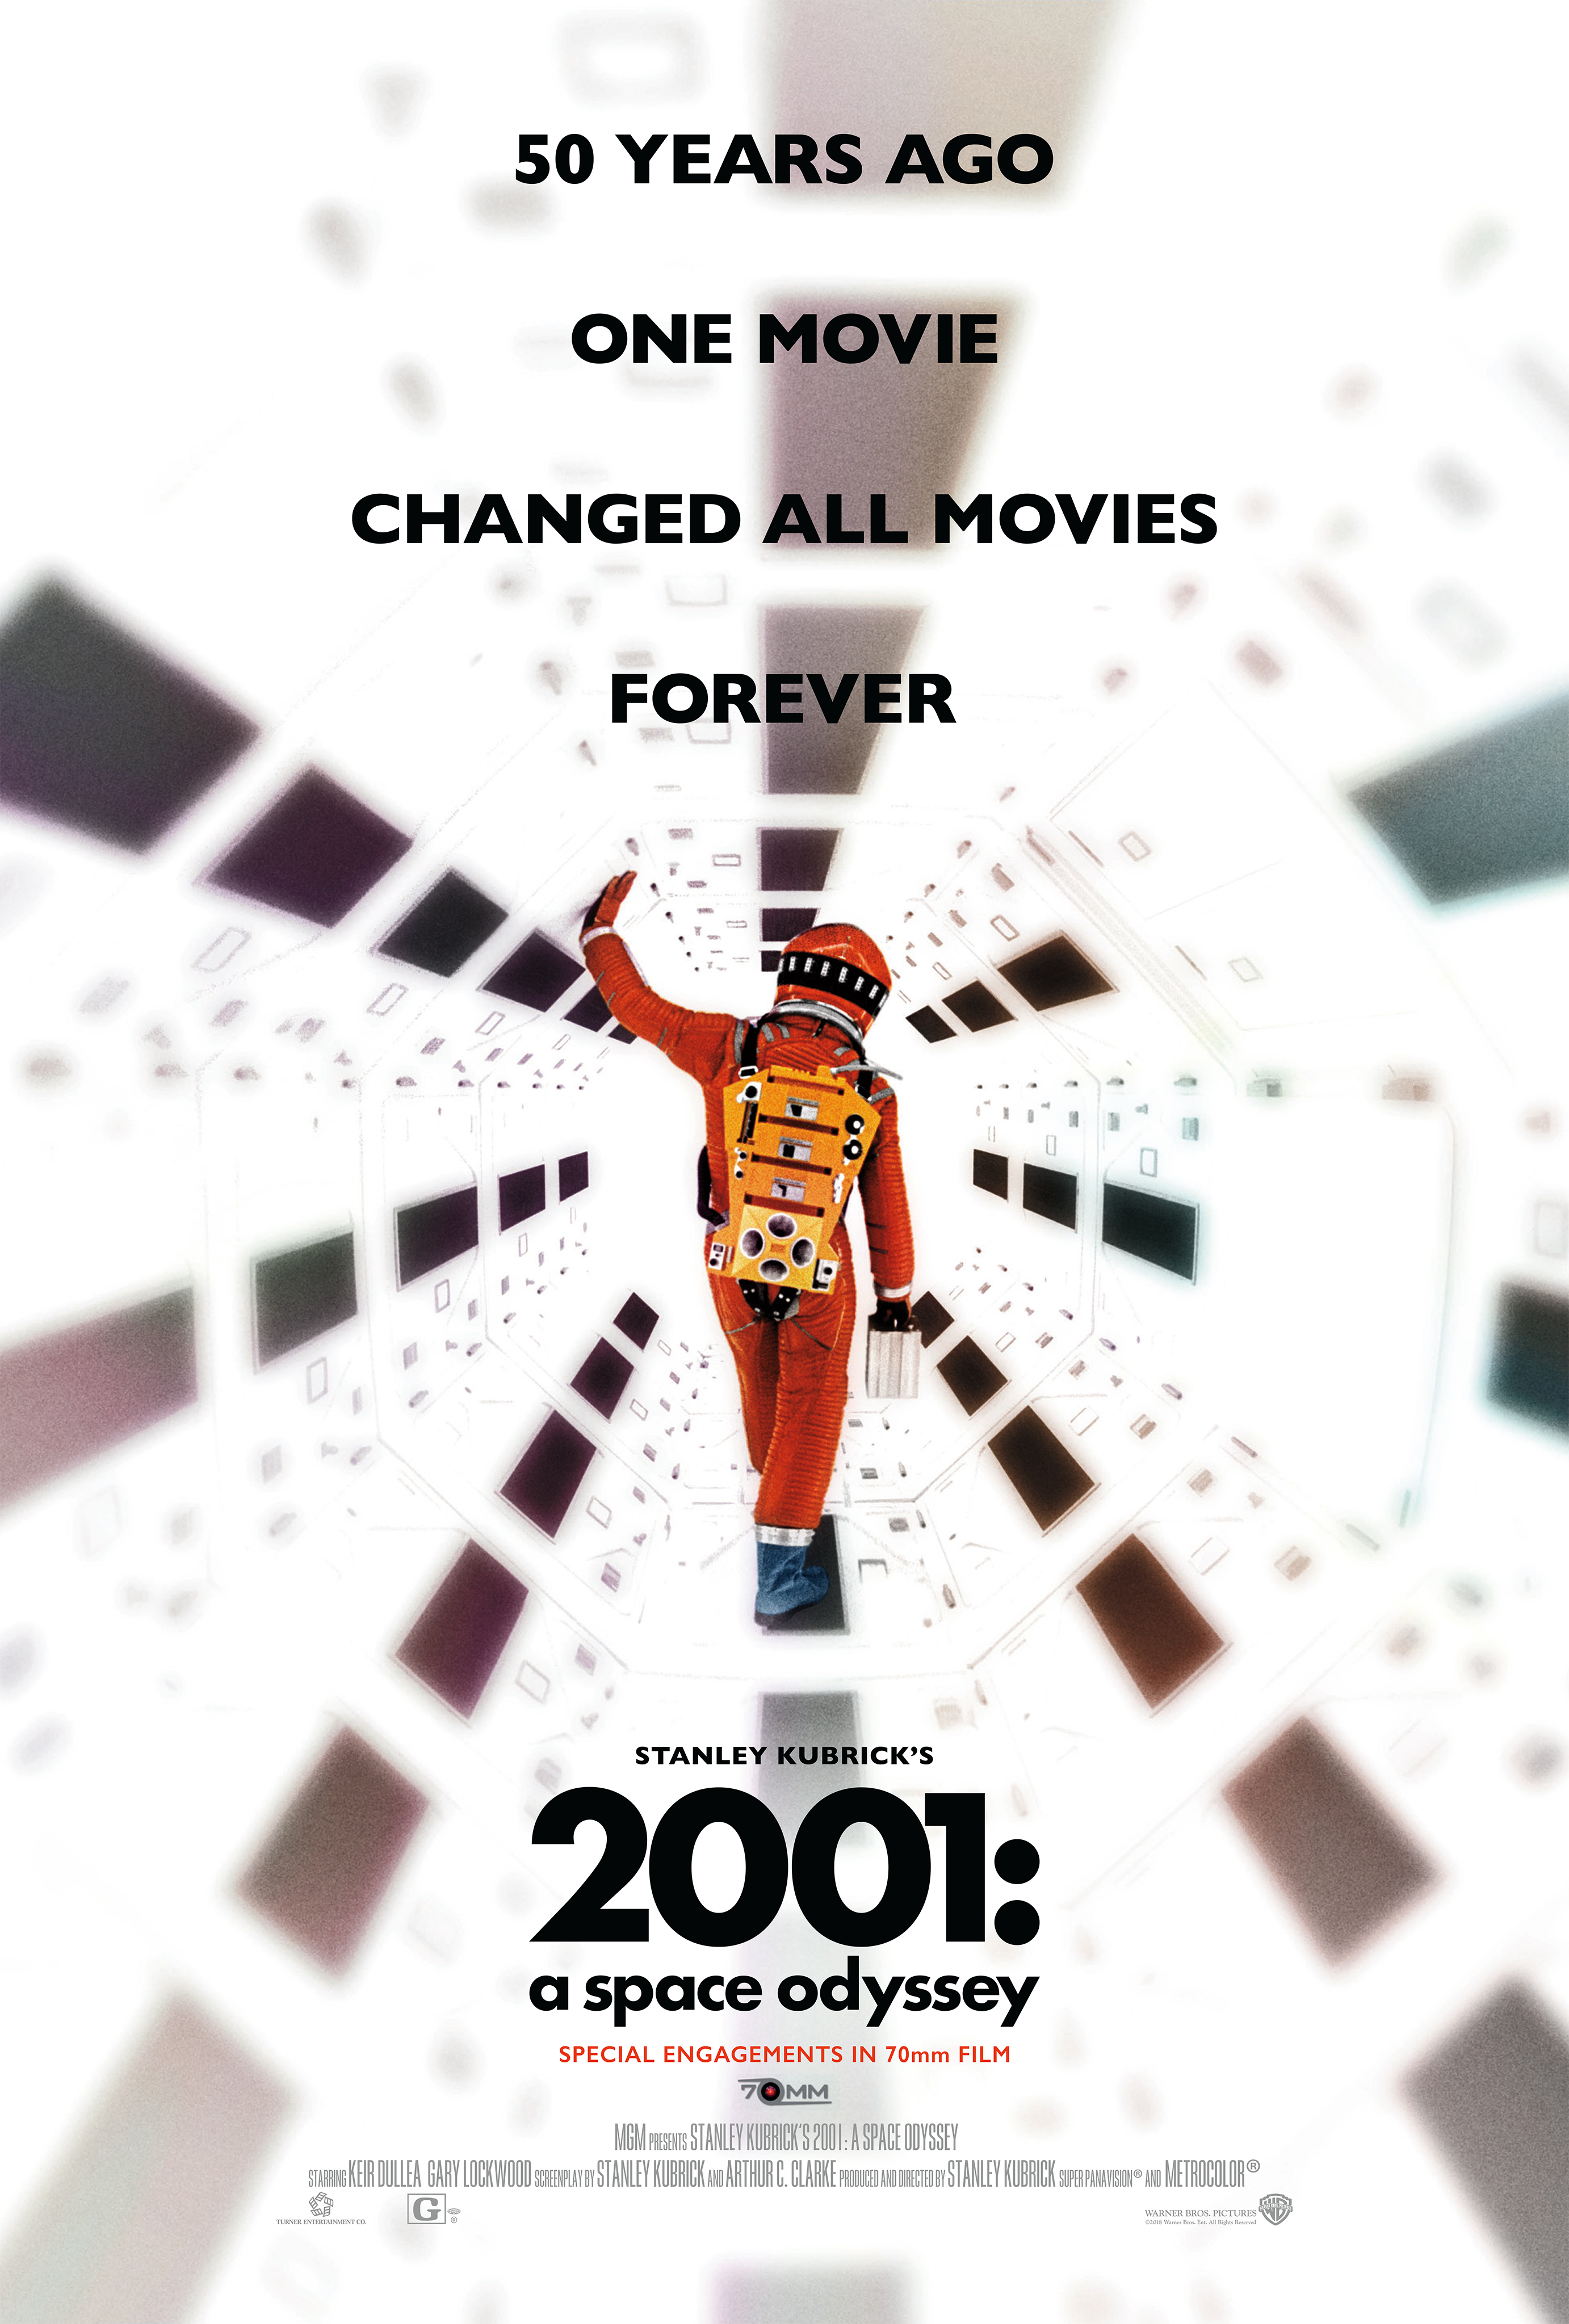 2001: A Space Odyssey 70mm film review Cannes 2018: a magnificent trip